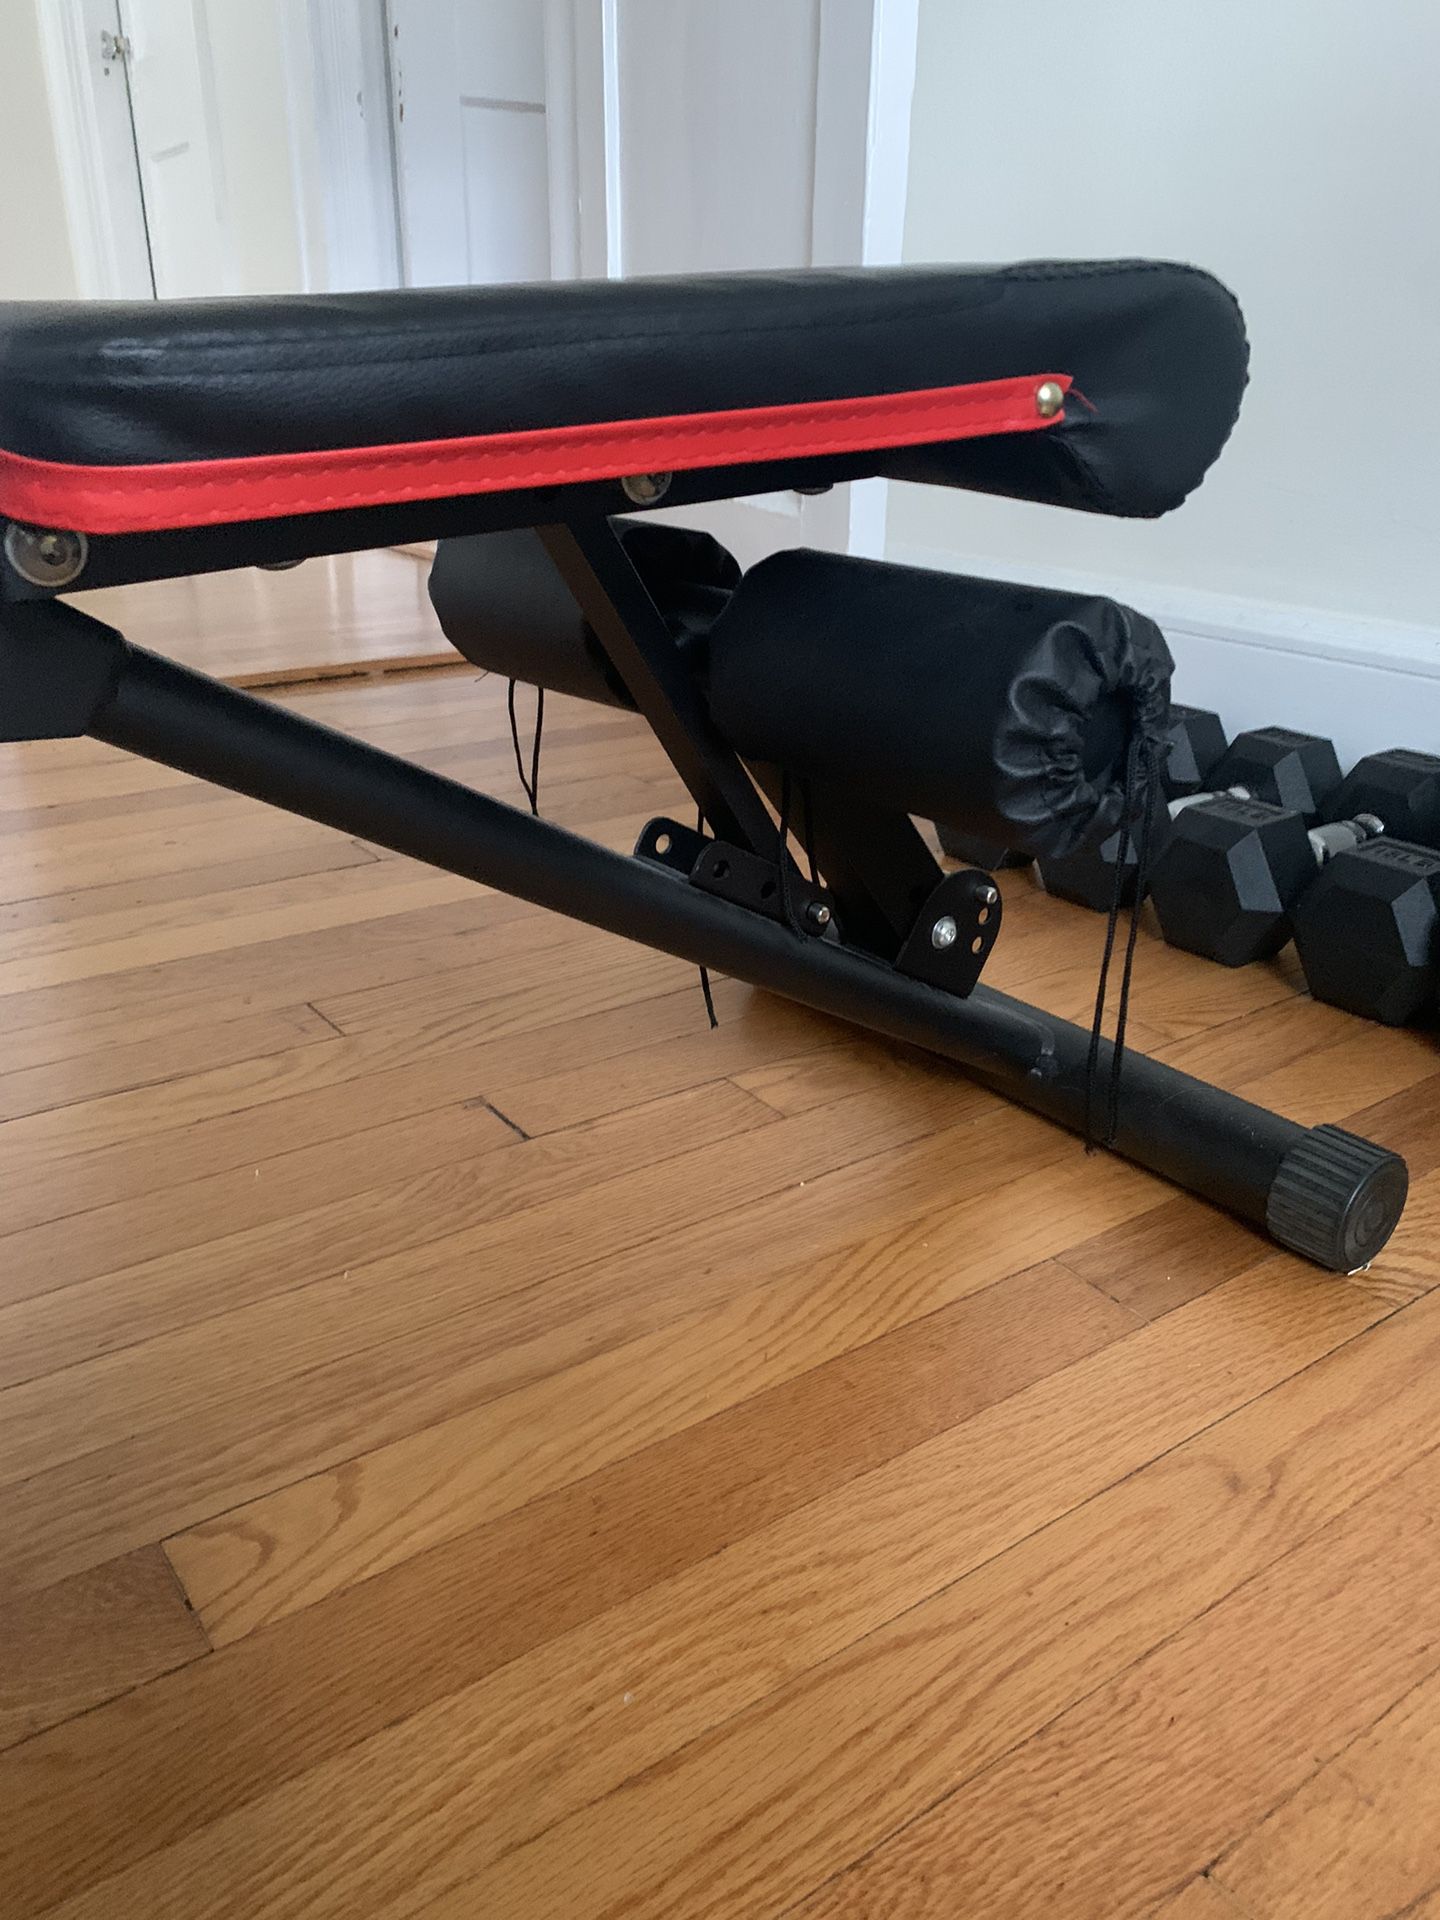 Workout Weight bench